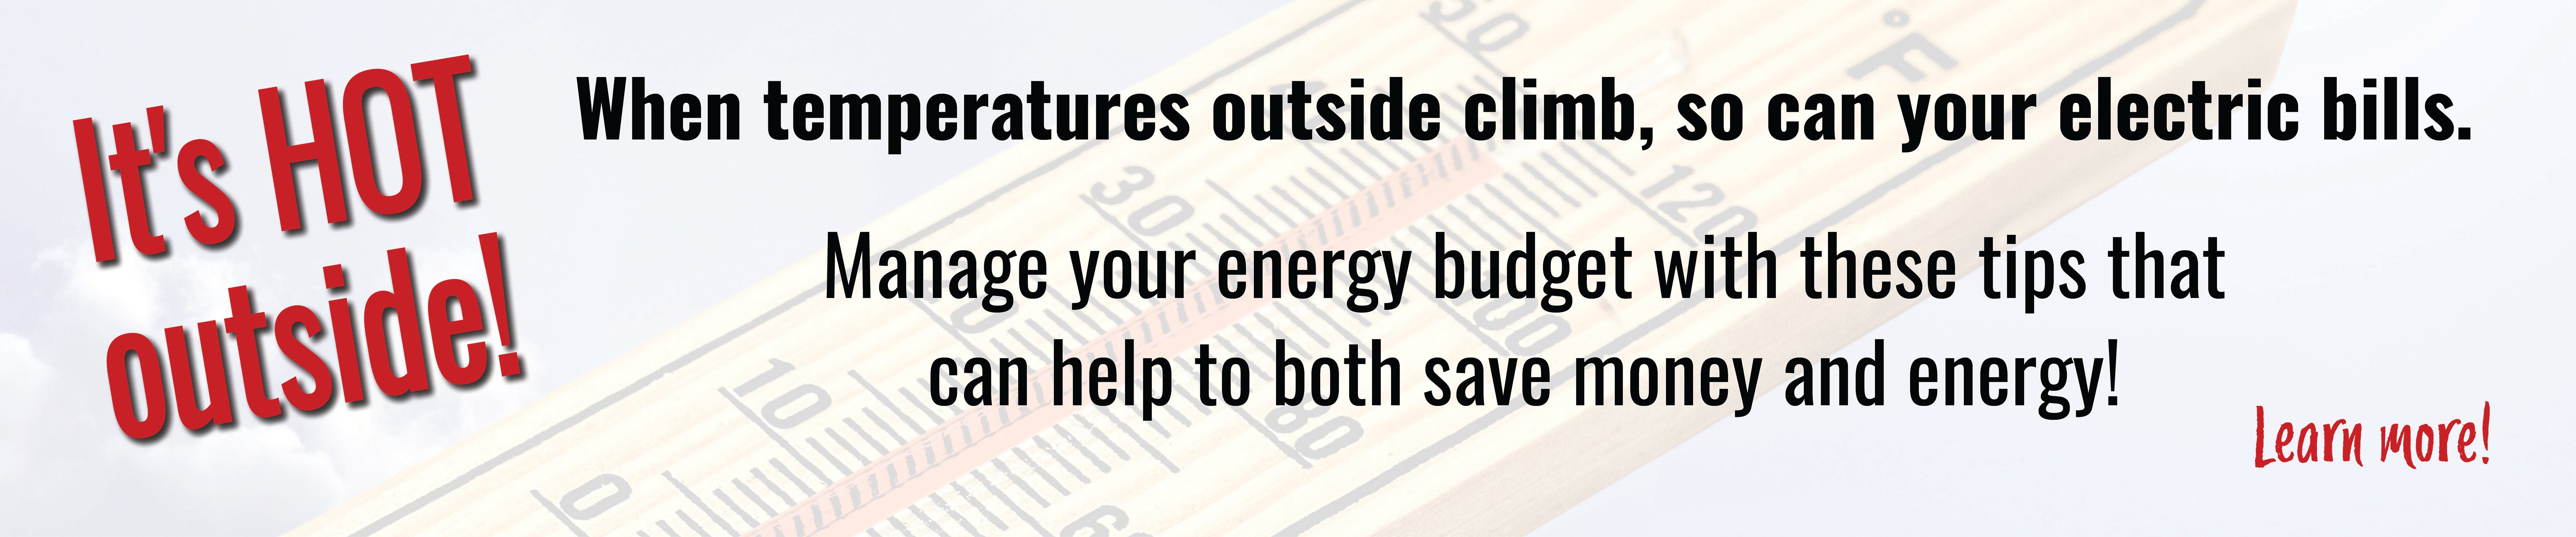 When temperatures outside climb, so can your electric bills